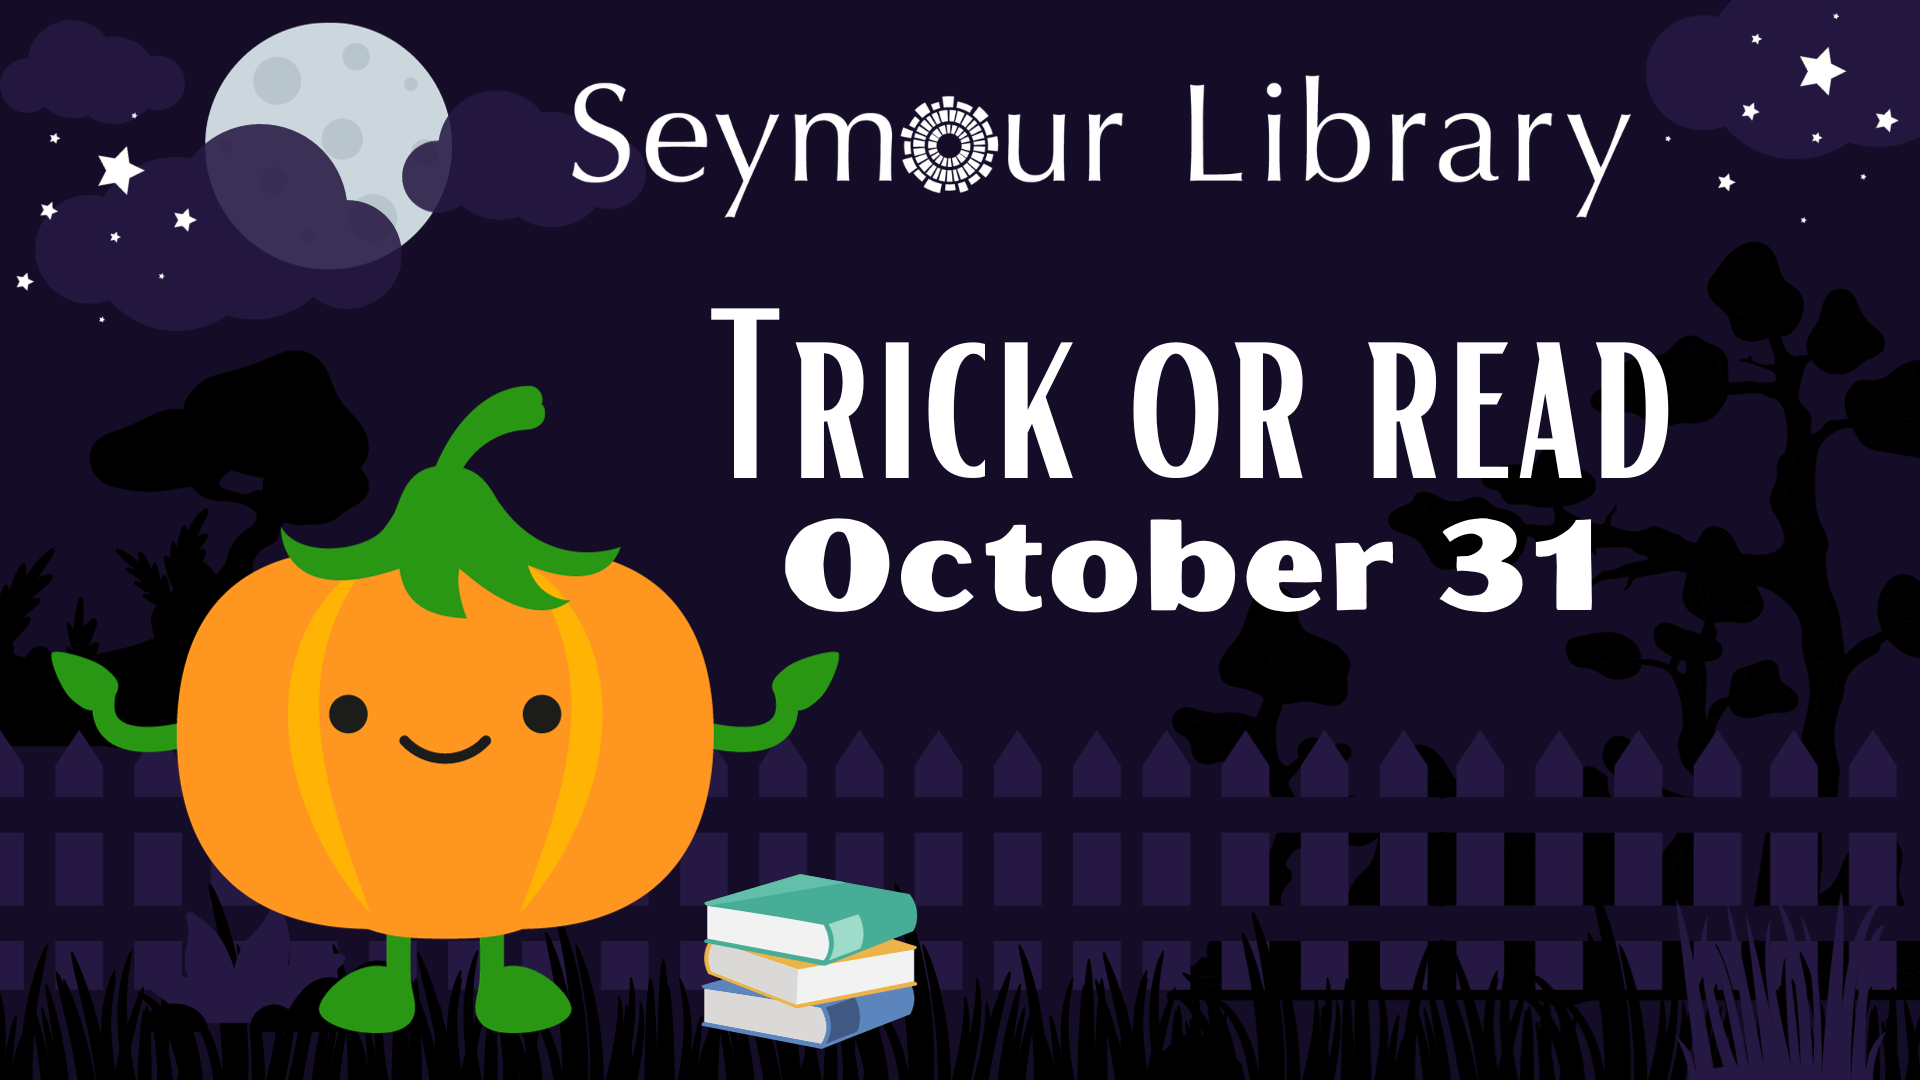 Make Seymour Library part of your Halloween plans! The library will be offering a fun trick-or-treat option for families.